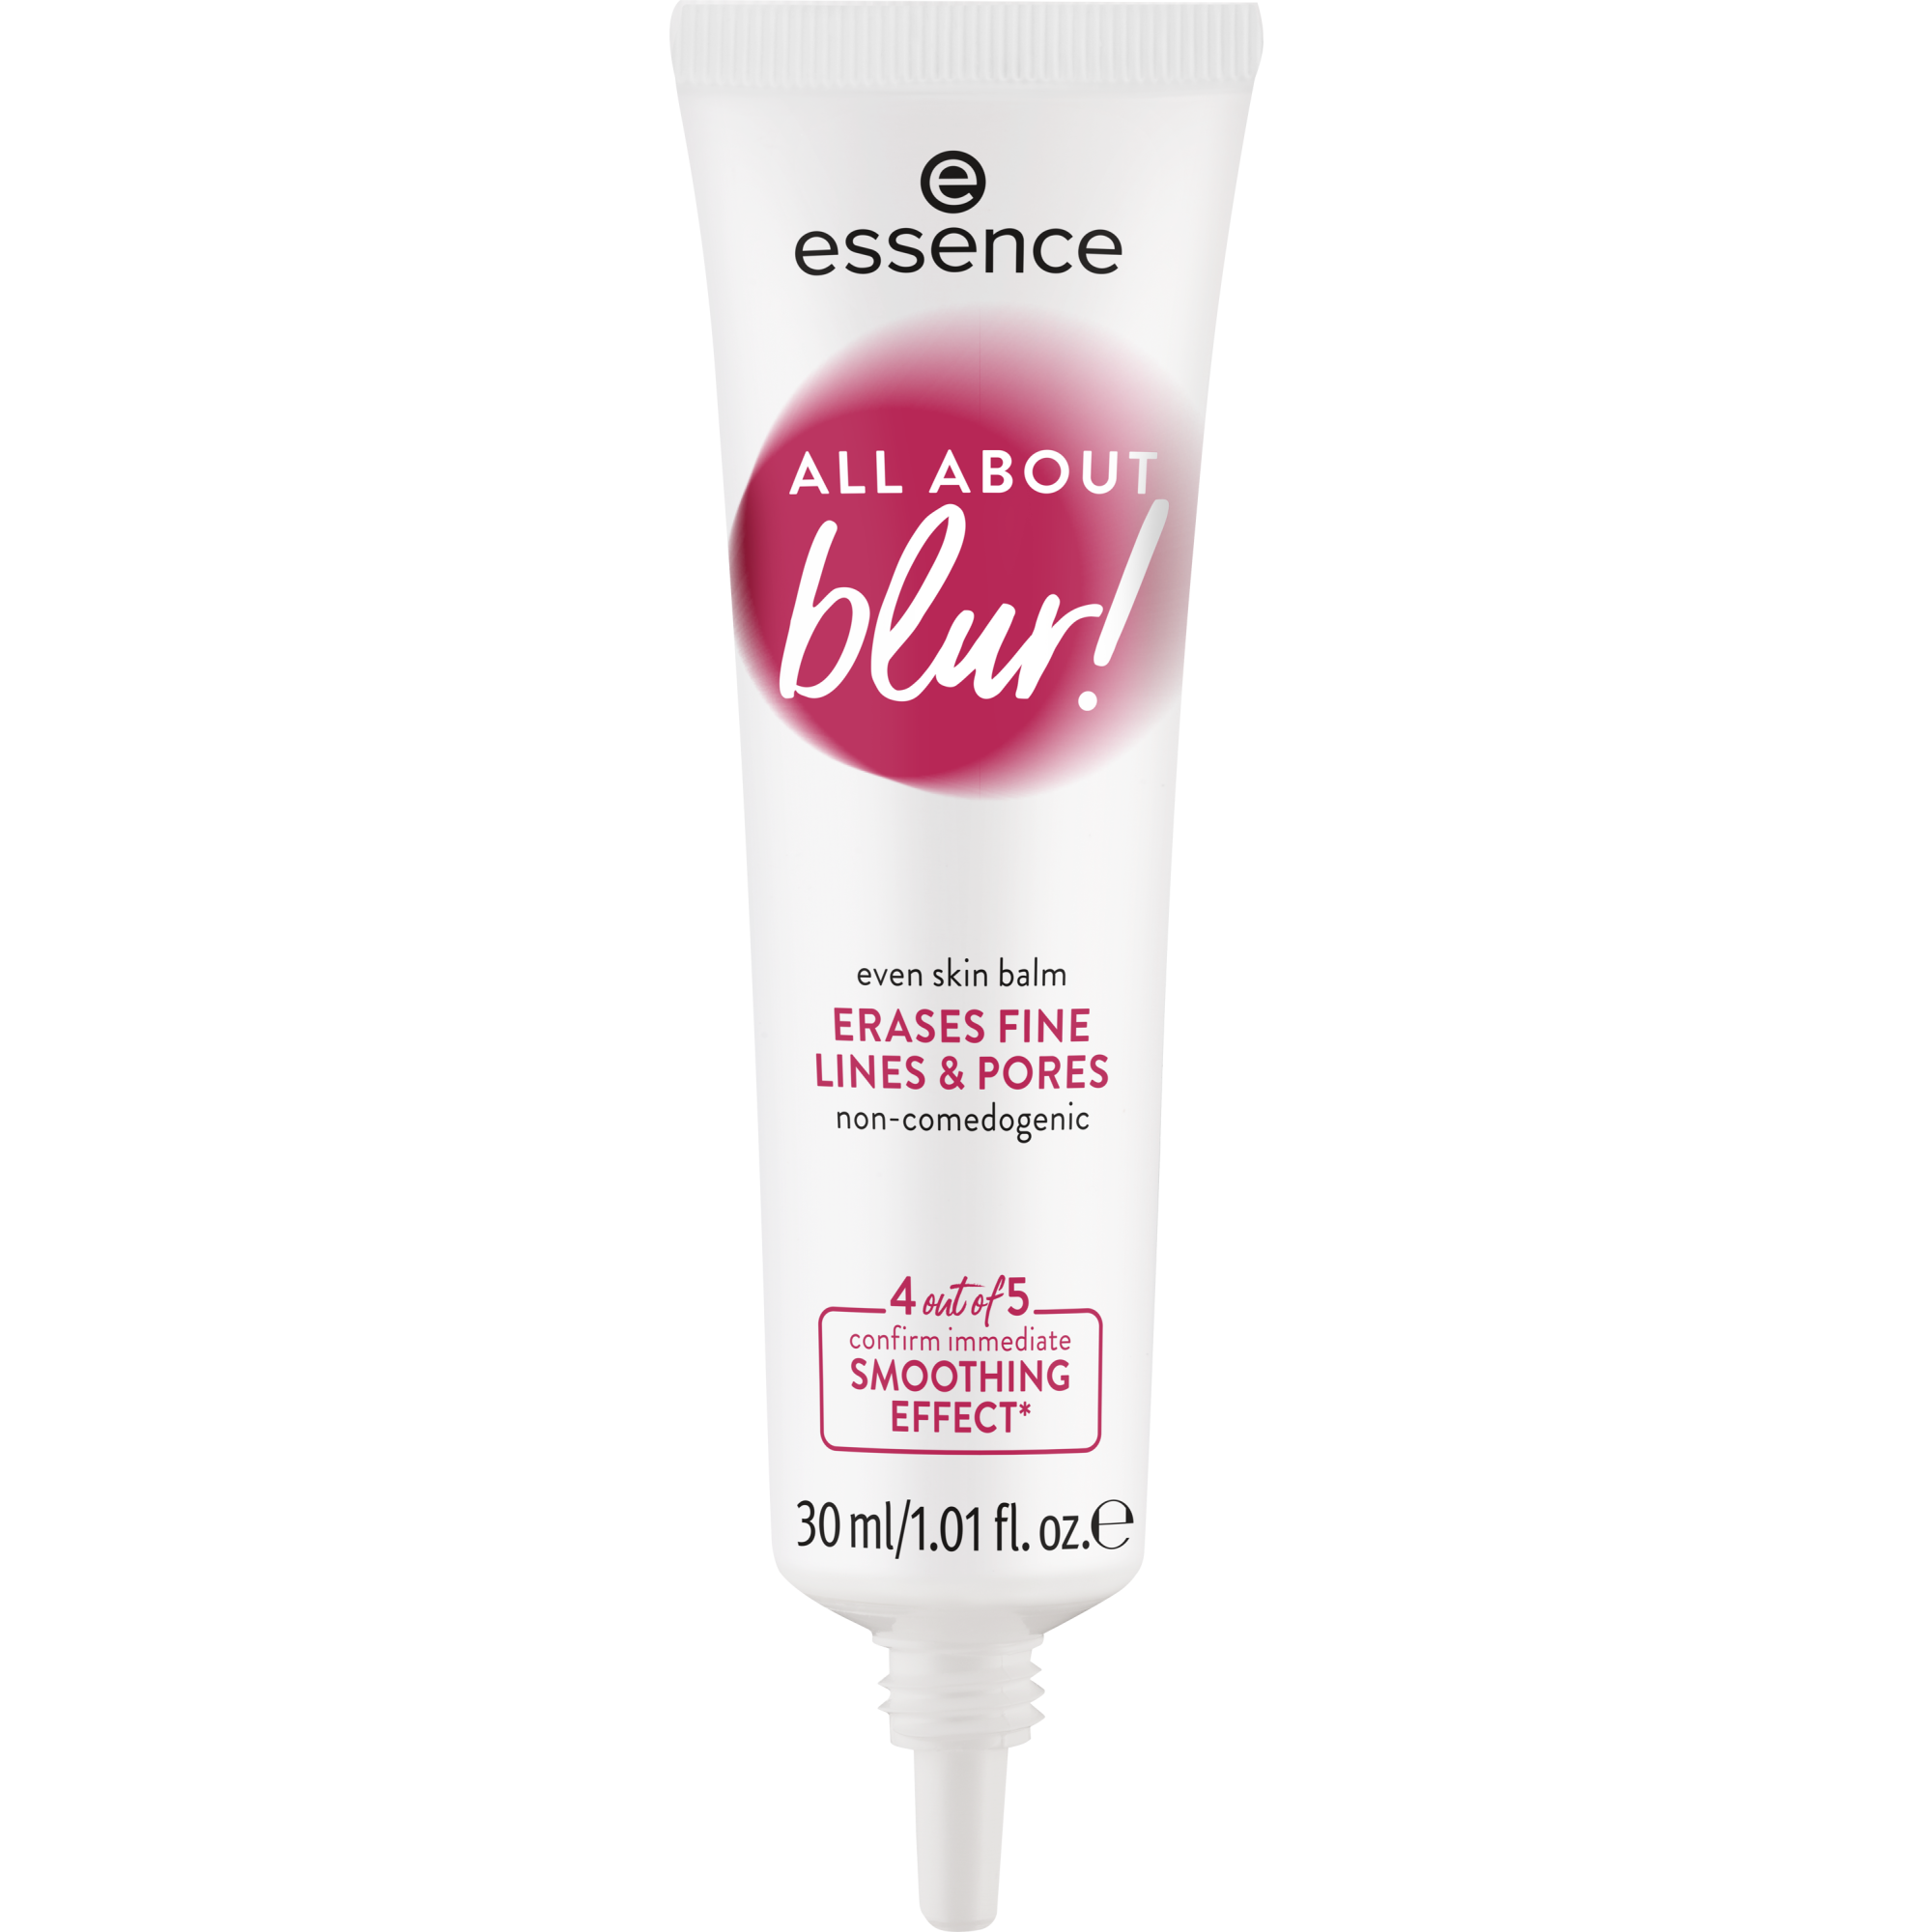 ALL ABOUT blur! even skin balm